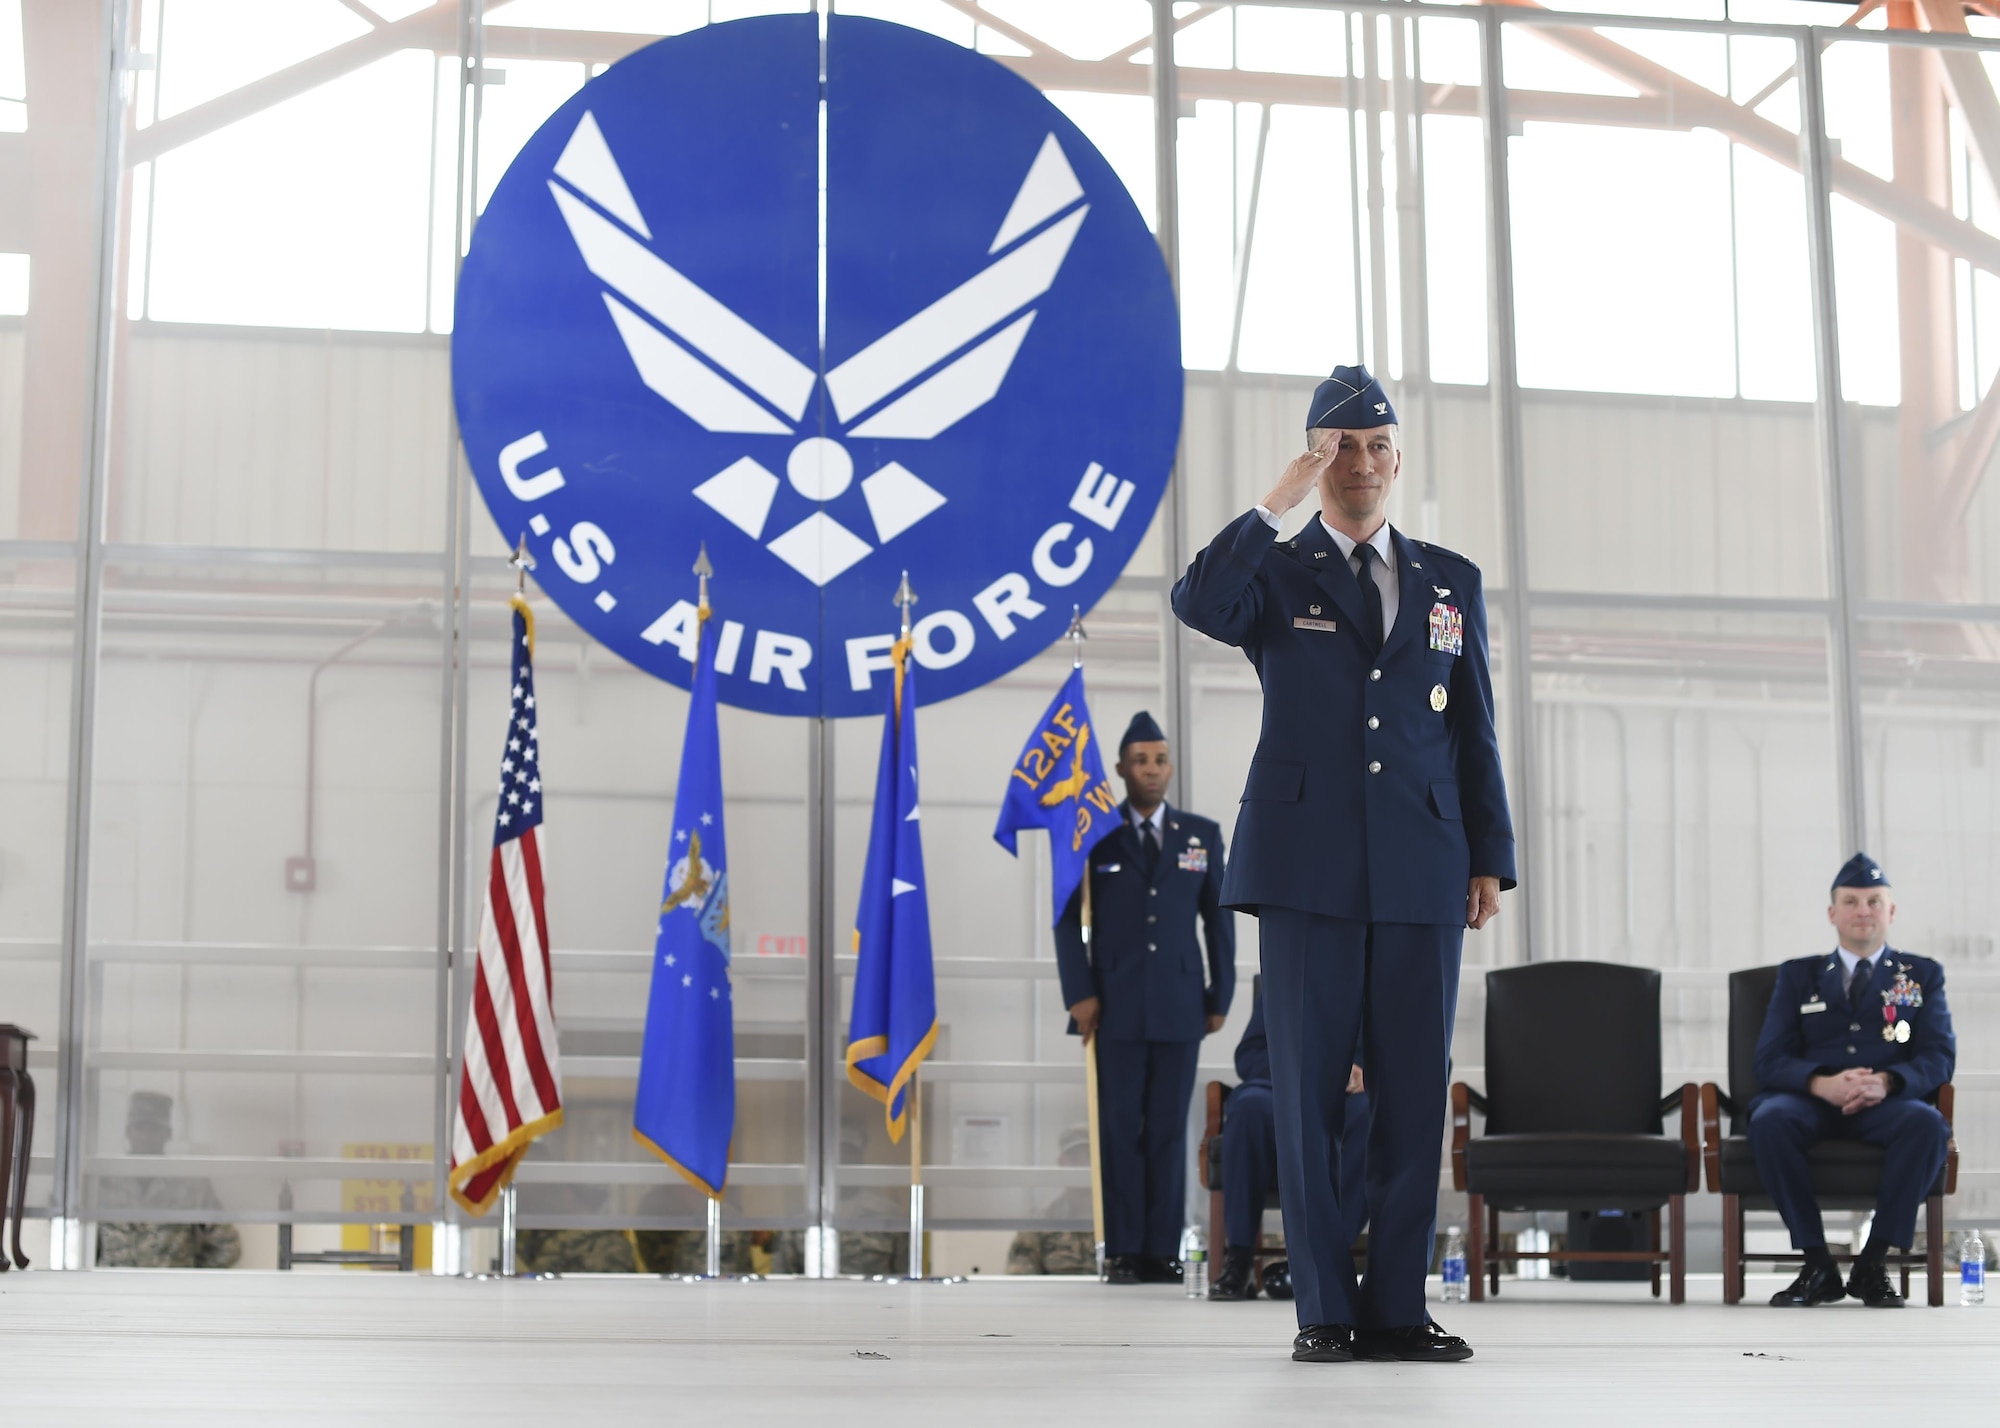 Col. Houston Cantwell, the 49th Wing commander renders his first salute as wing commander during a change-of-command ceremony July 15 at Hangar 500 at Holloman Air Force Base N.M. Col. Houston Cantwell assumed command of the 49th Wing and Holloman Air Force Base from the previous commander, Col. Robert Kiebler. As commander of the 49th Wing, Cantwell will lead Holloman’s mission to provide combat-ready Airmen, train MQ-1 Predator and MQ-9 Reaper pilots and sensor operators, and hosts the 54th Fighter Group's F-16 Fighting Falcon pilot training mission, the 96th Test Group's high-speed test track mission and the German Air Force Flying Training Center. (U.S. Air Force Photo by: Staff Sgt. Stacy Moless)